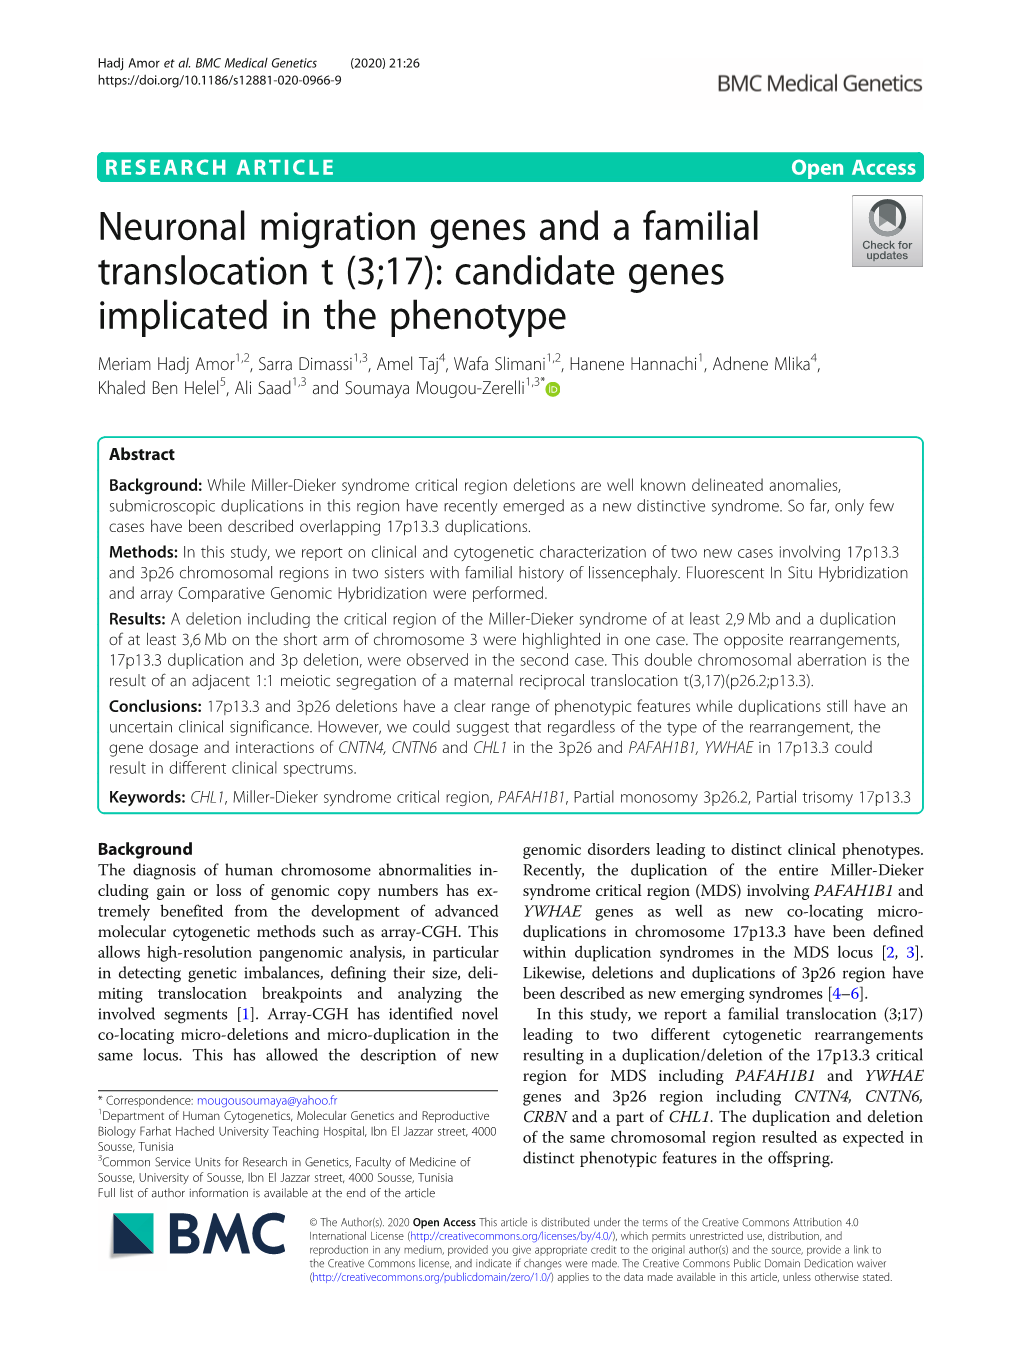 Neuronal Migration Genes and a Familial Translocation T (3;17)